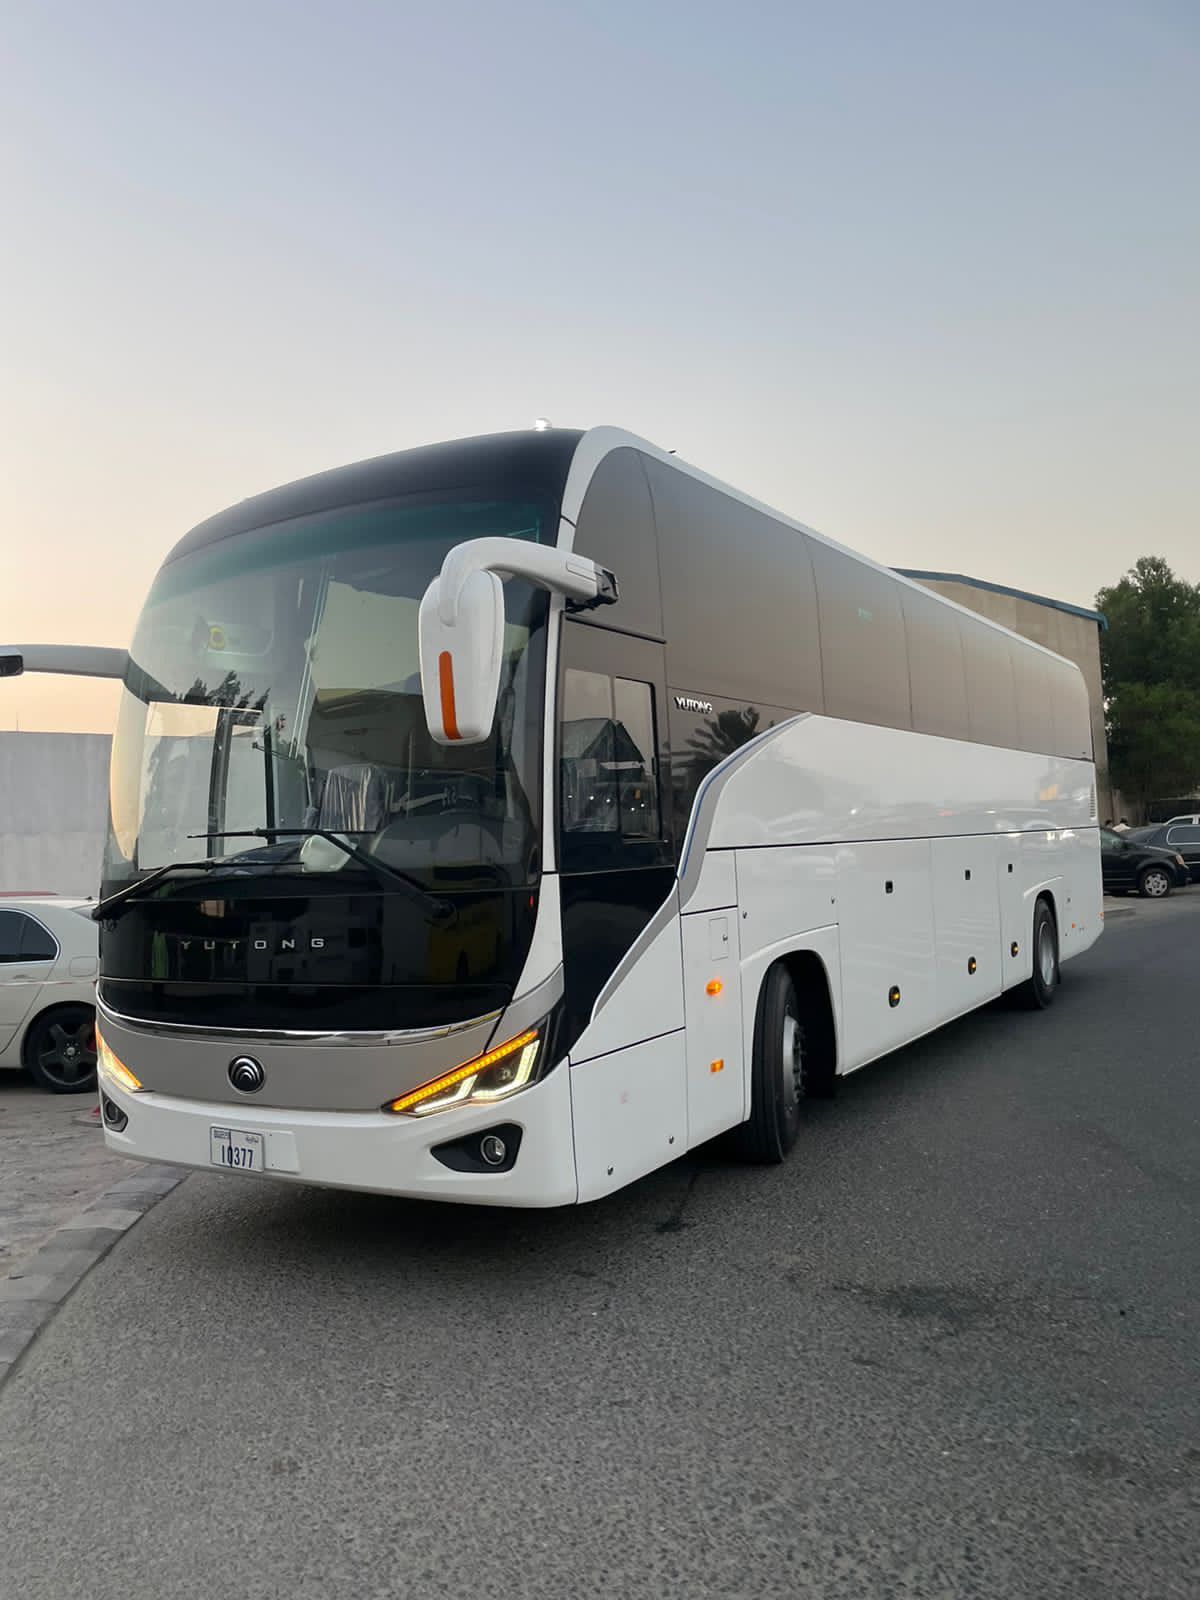 Image of a 50 seater bus available for hire in Sharjah